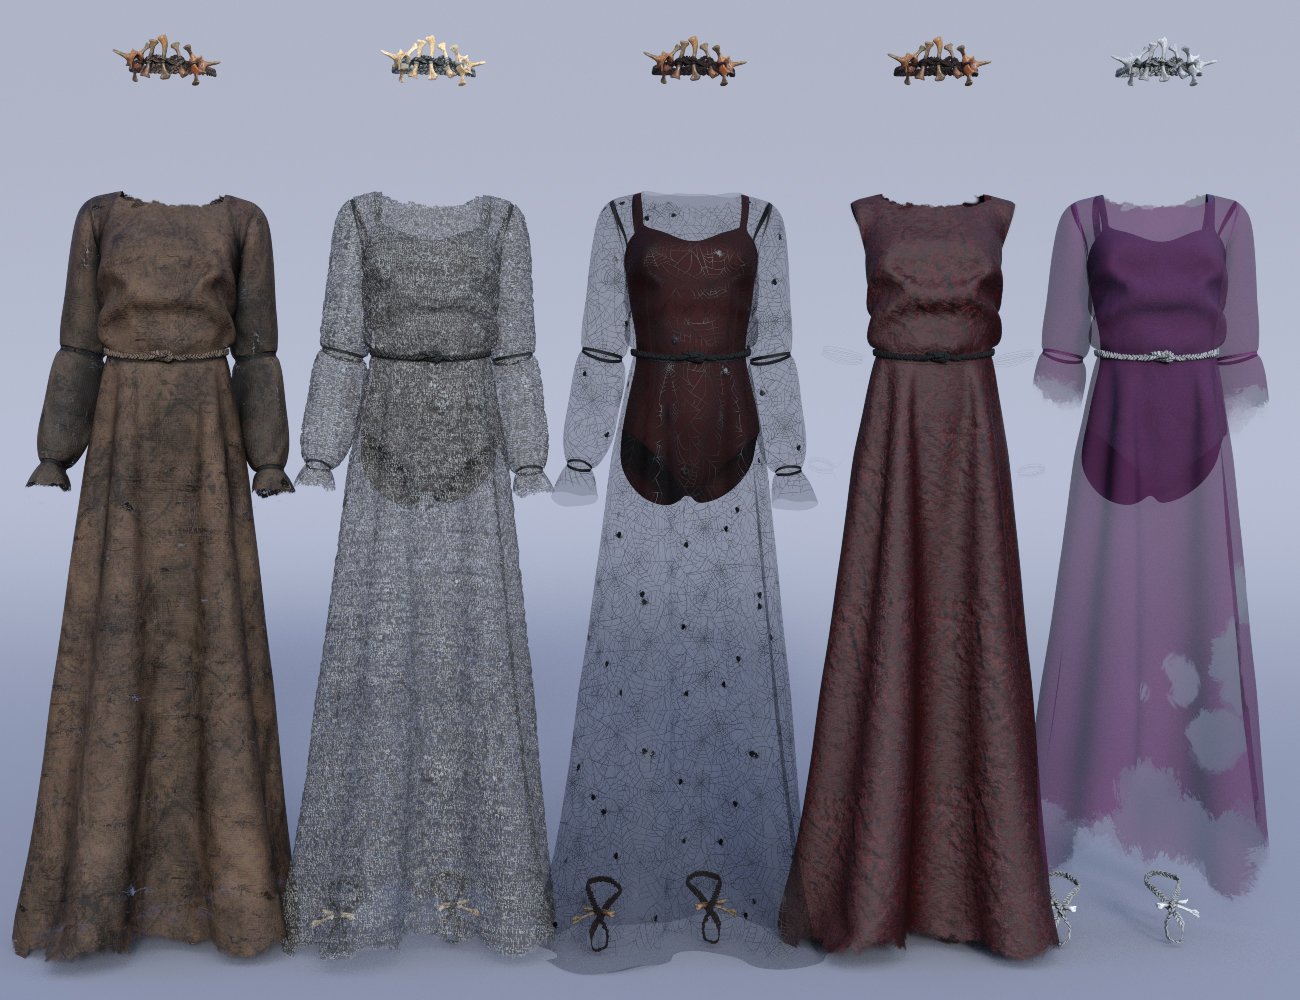 dForce Dark Fairy Gown Textures by: Moonscape GraphicsSade, 3D Models by Daz 3D